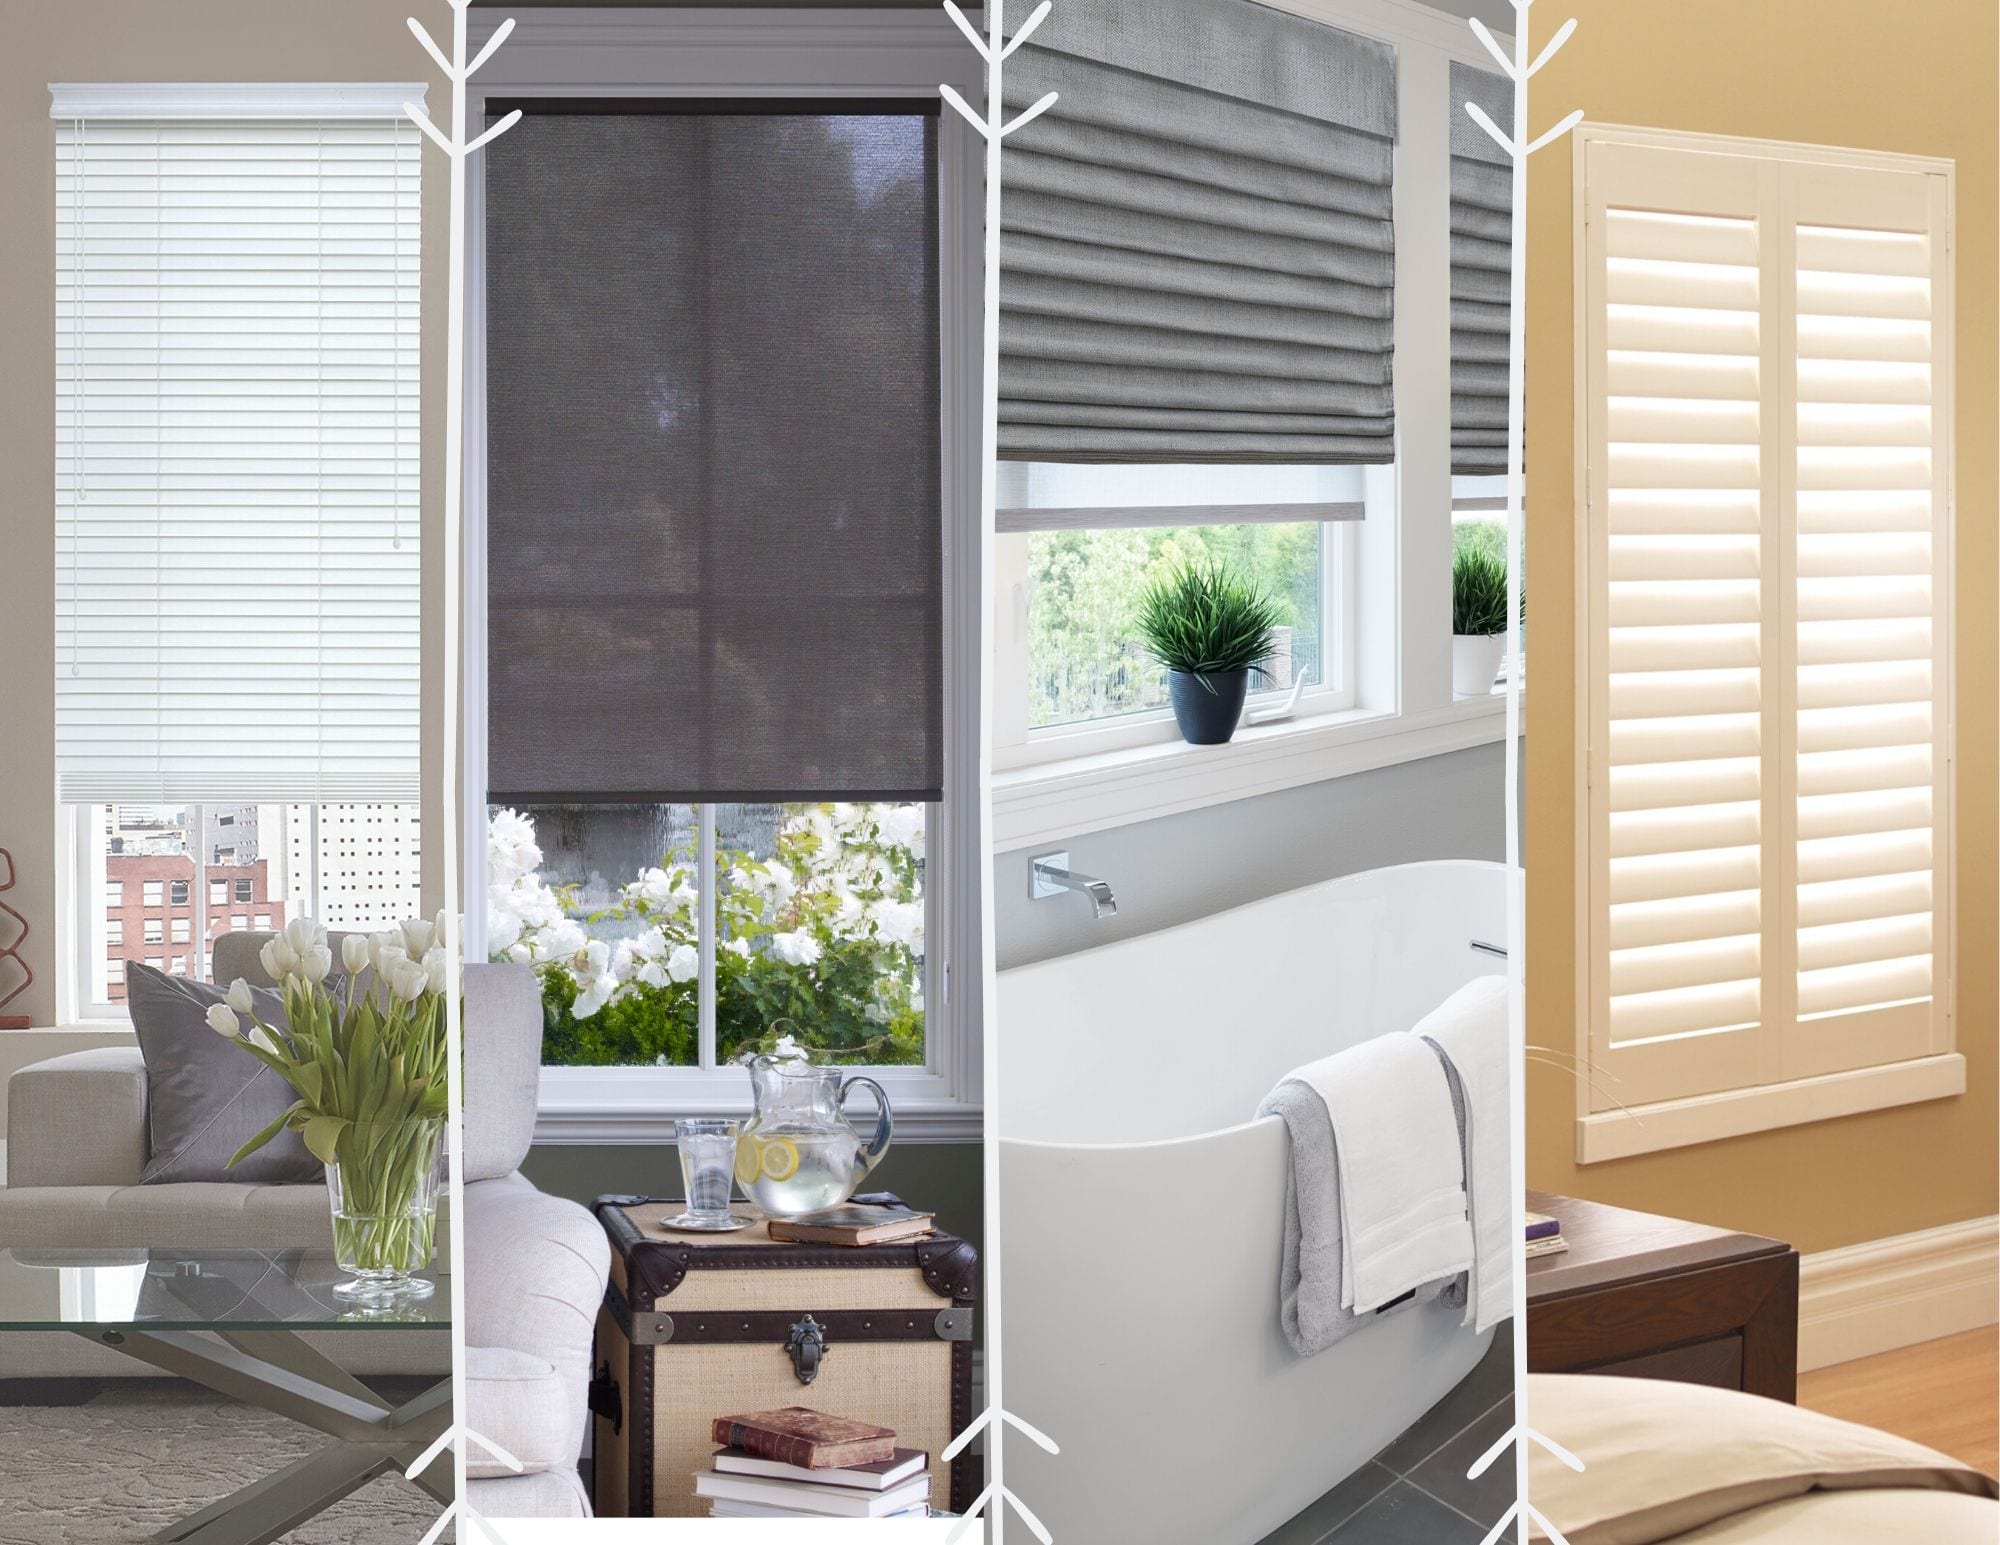 Side by side comparison of multiple window covering types. Shutters, Roman Shades, Roller Shades, and blinds.